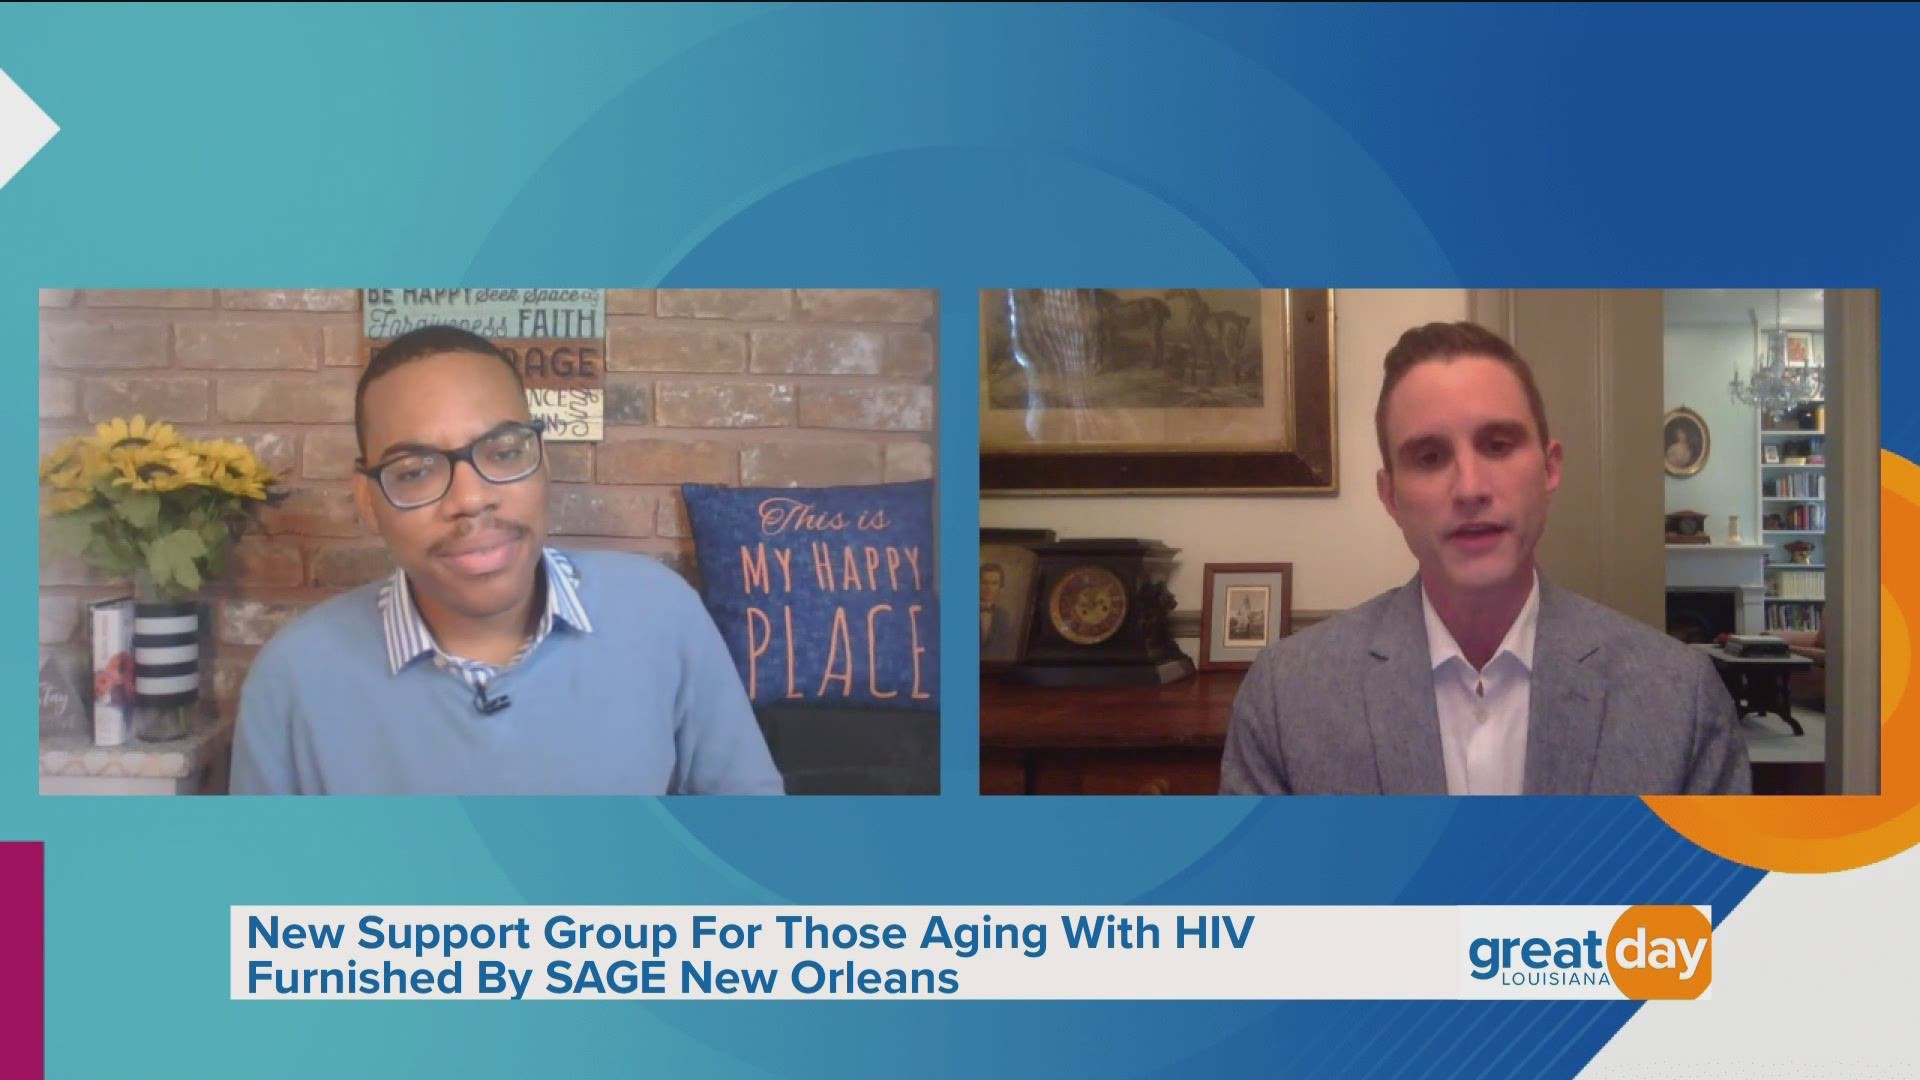 SAGE New Orleans shared details on their support group that focuses on people who are aging with HIV/AIDS.